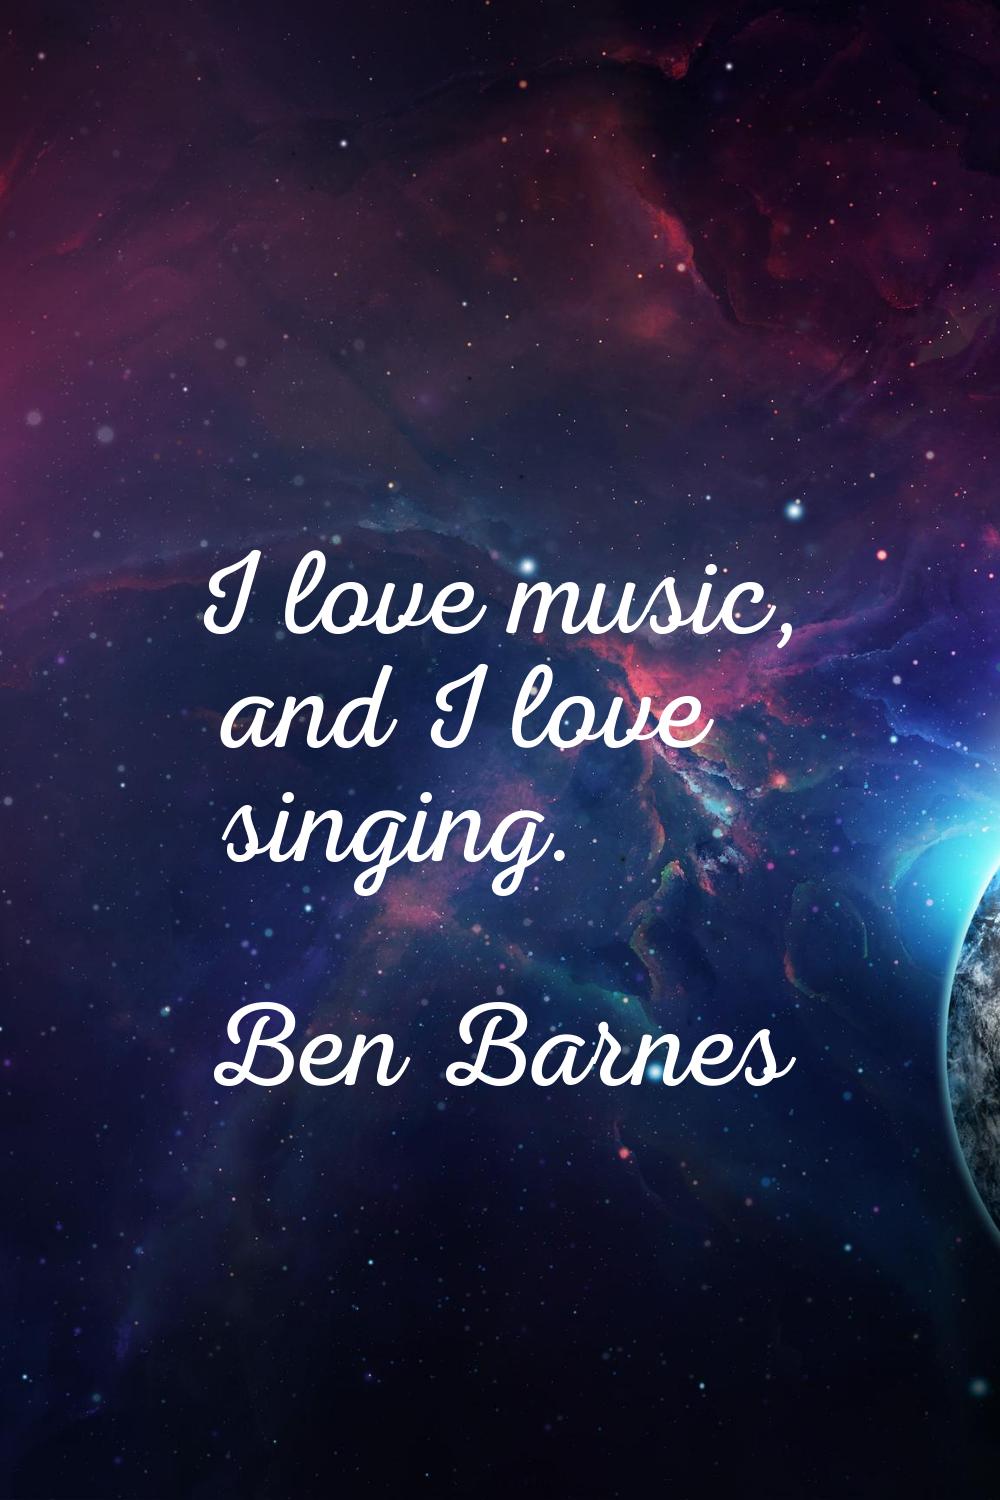 I love music, and I love singing.